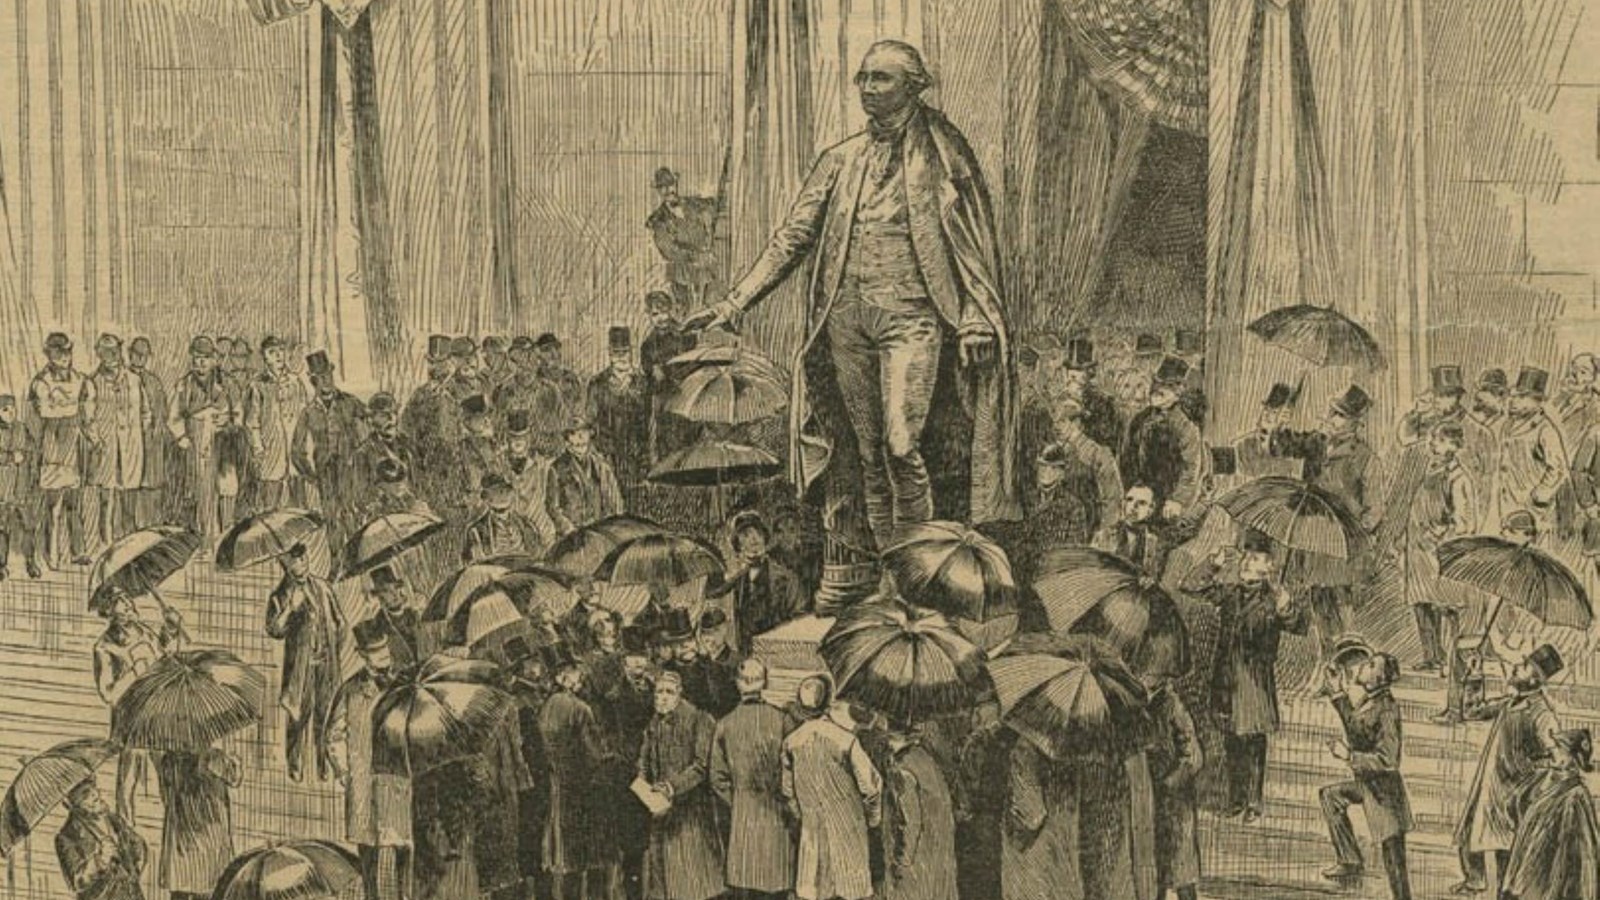 Woodcut illustration of the unveiling of the Statue of George Washington 